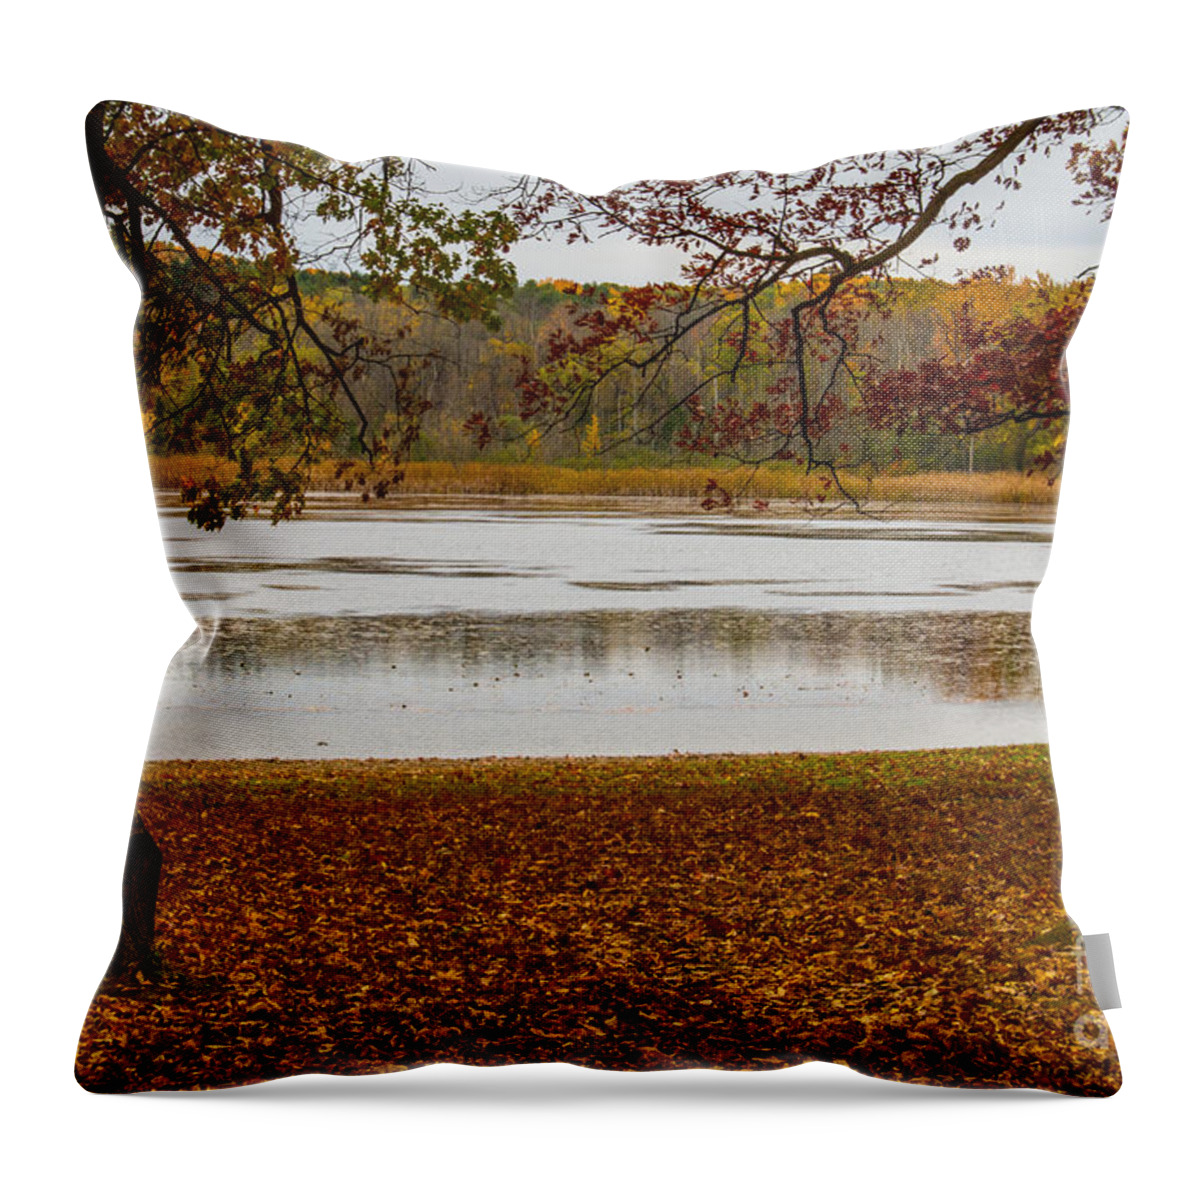 Mendon Ponds Throw Pillow featuring the photograph Mendon Ponds by William Norton